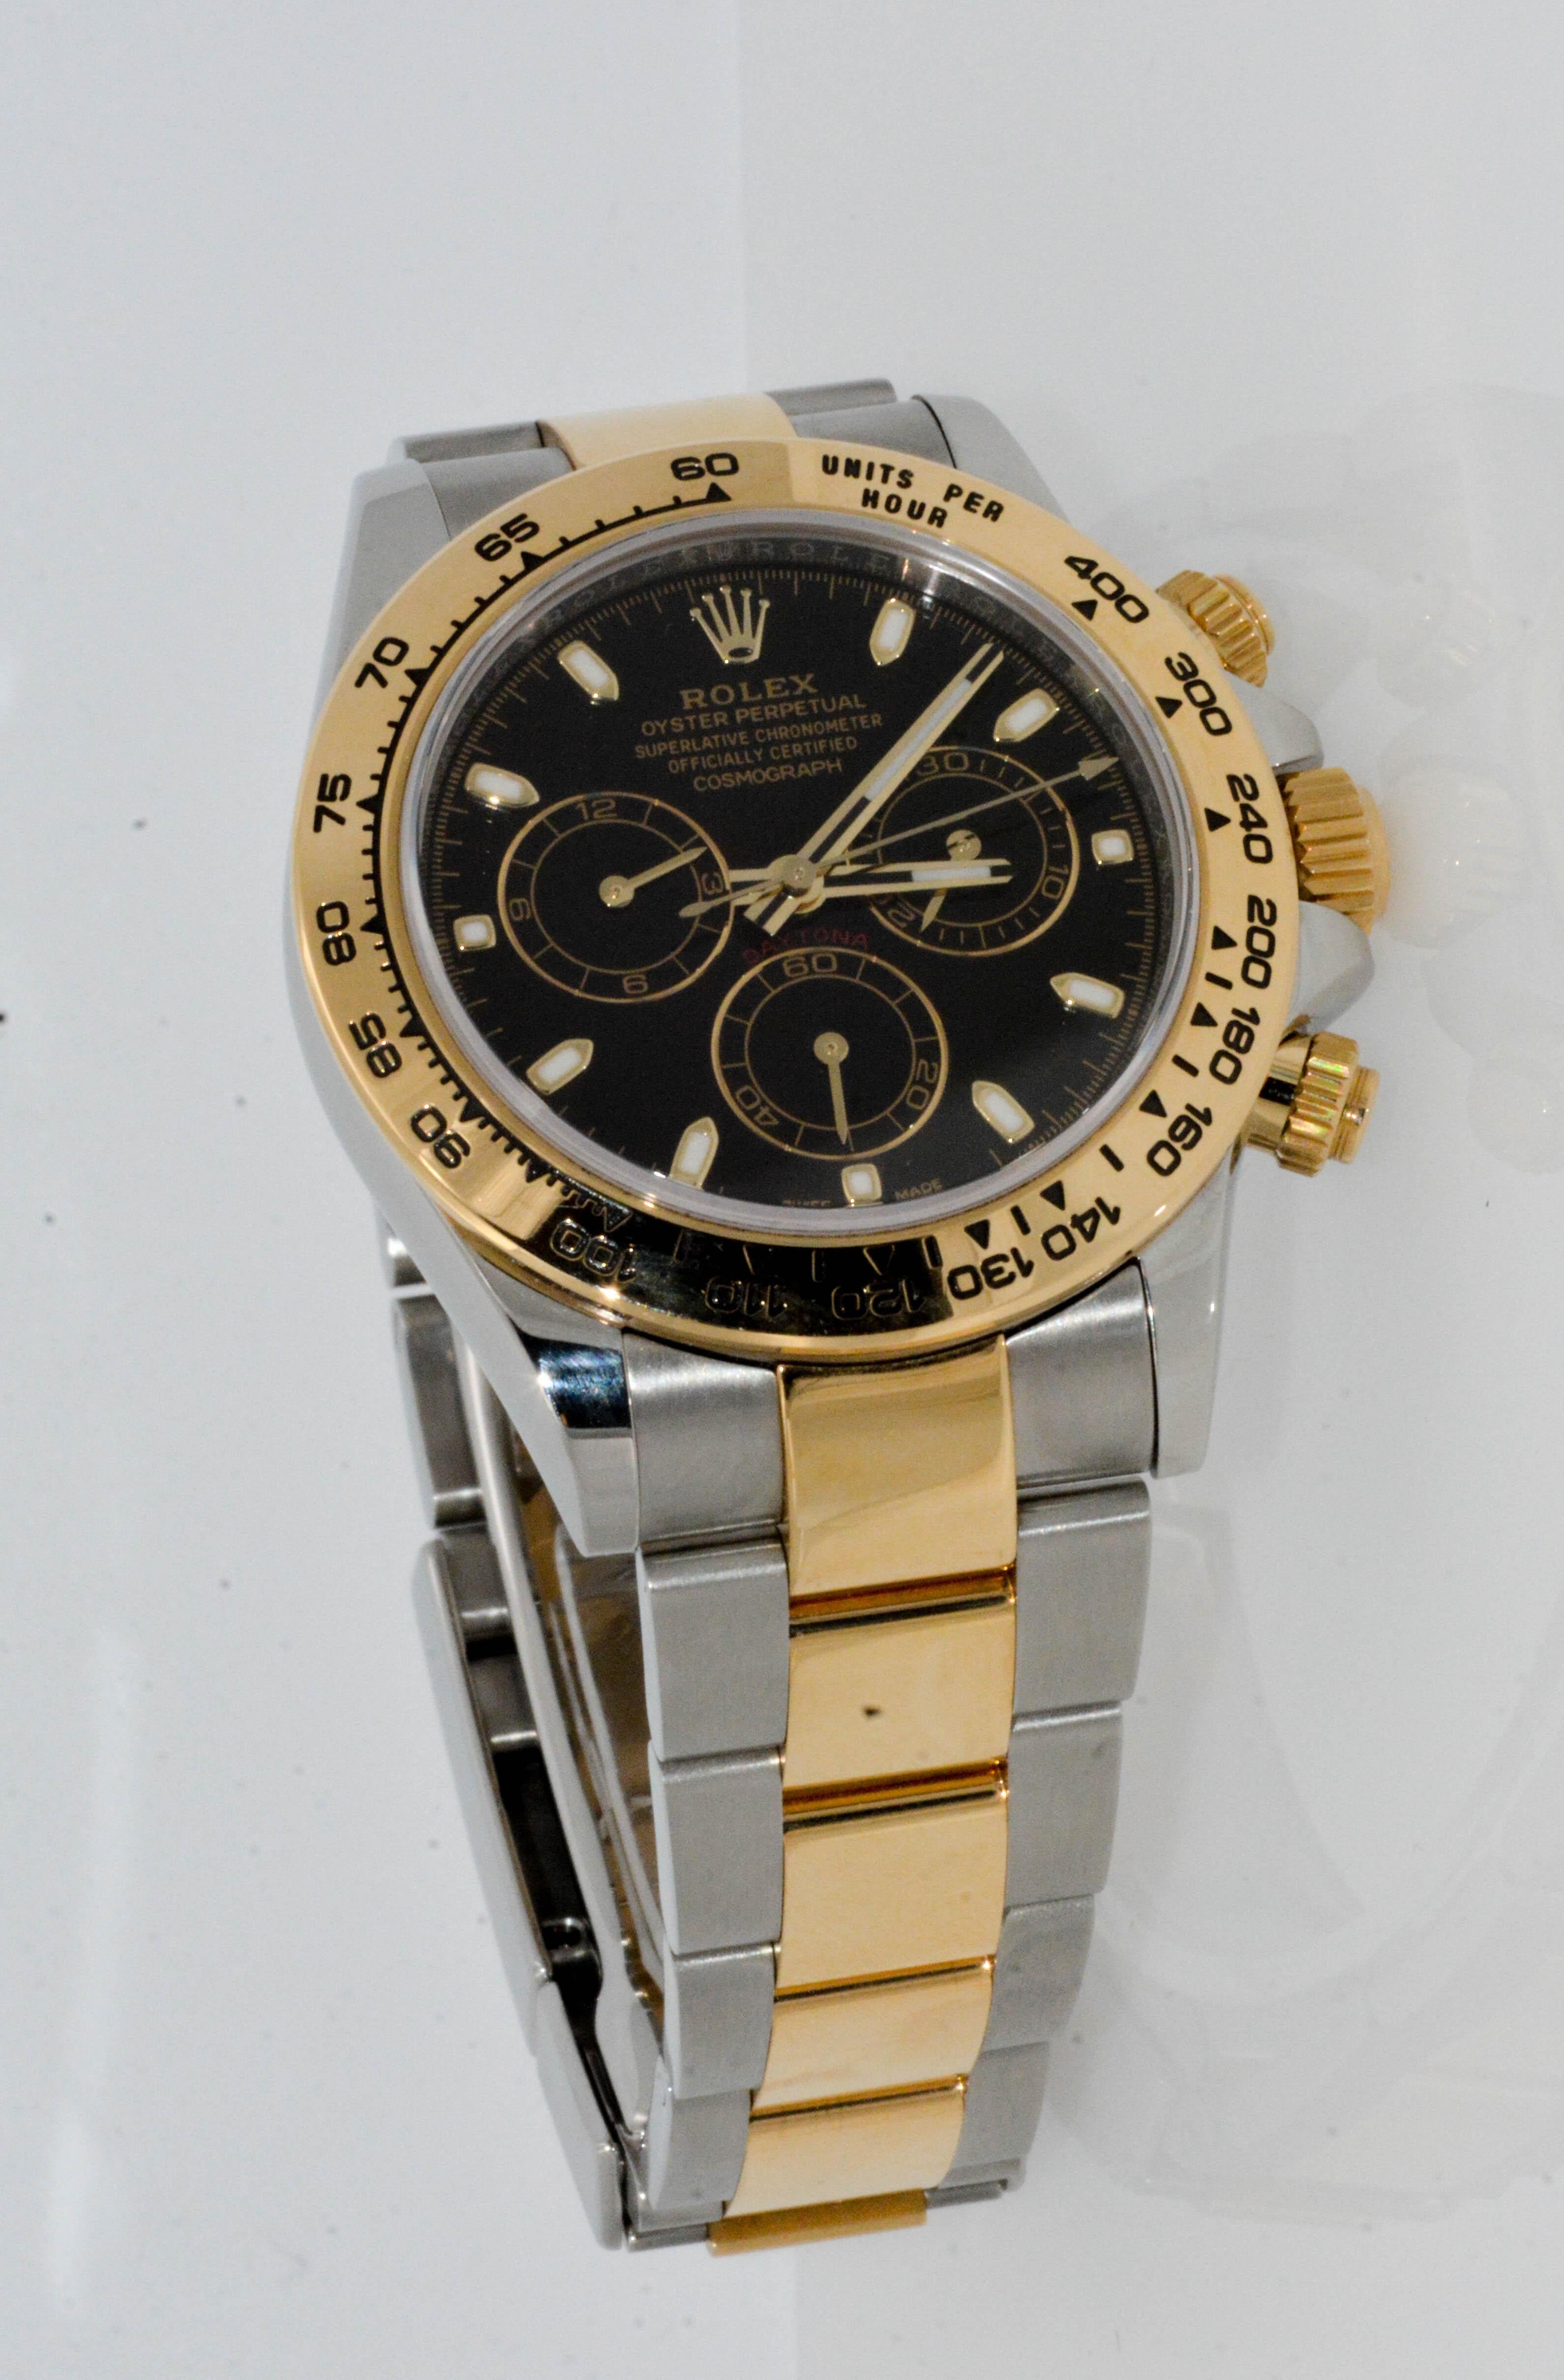 Stainless Steel and 18 karat yellow gold ROLEX Daytona Cosmo, Oyster Perpetual, Superlative Chronometer, Officially Certified Cosmograph watch. 40 mm. Black dial. Model 11650303304.